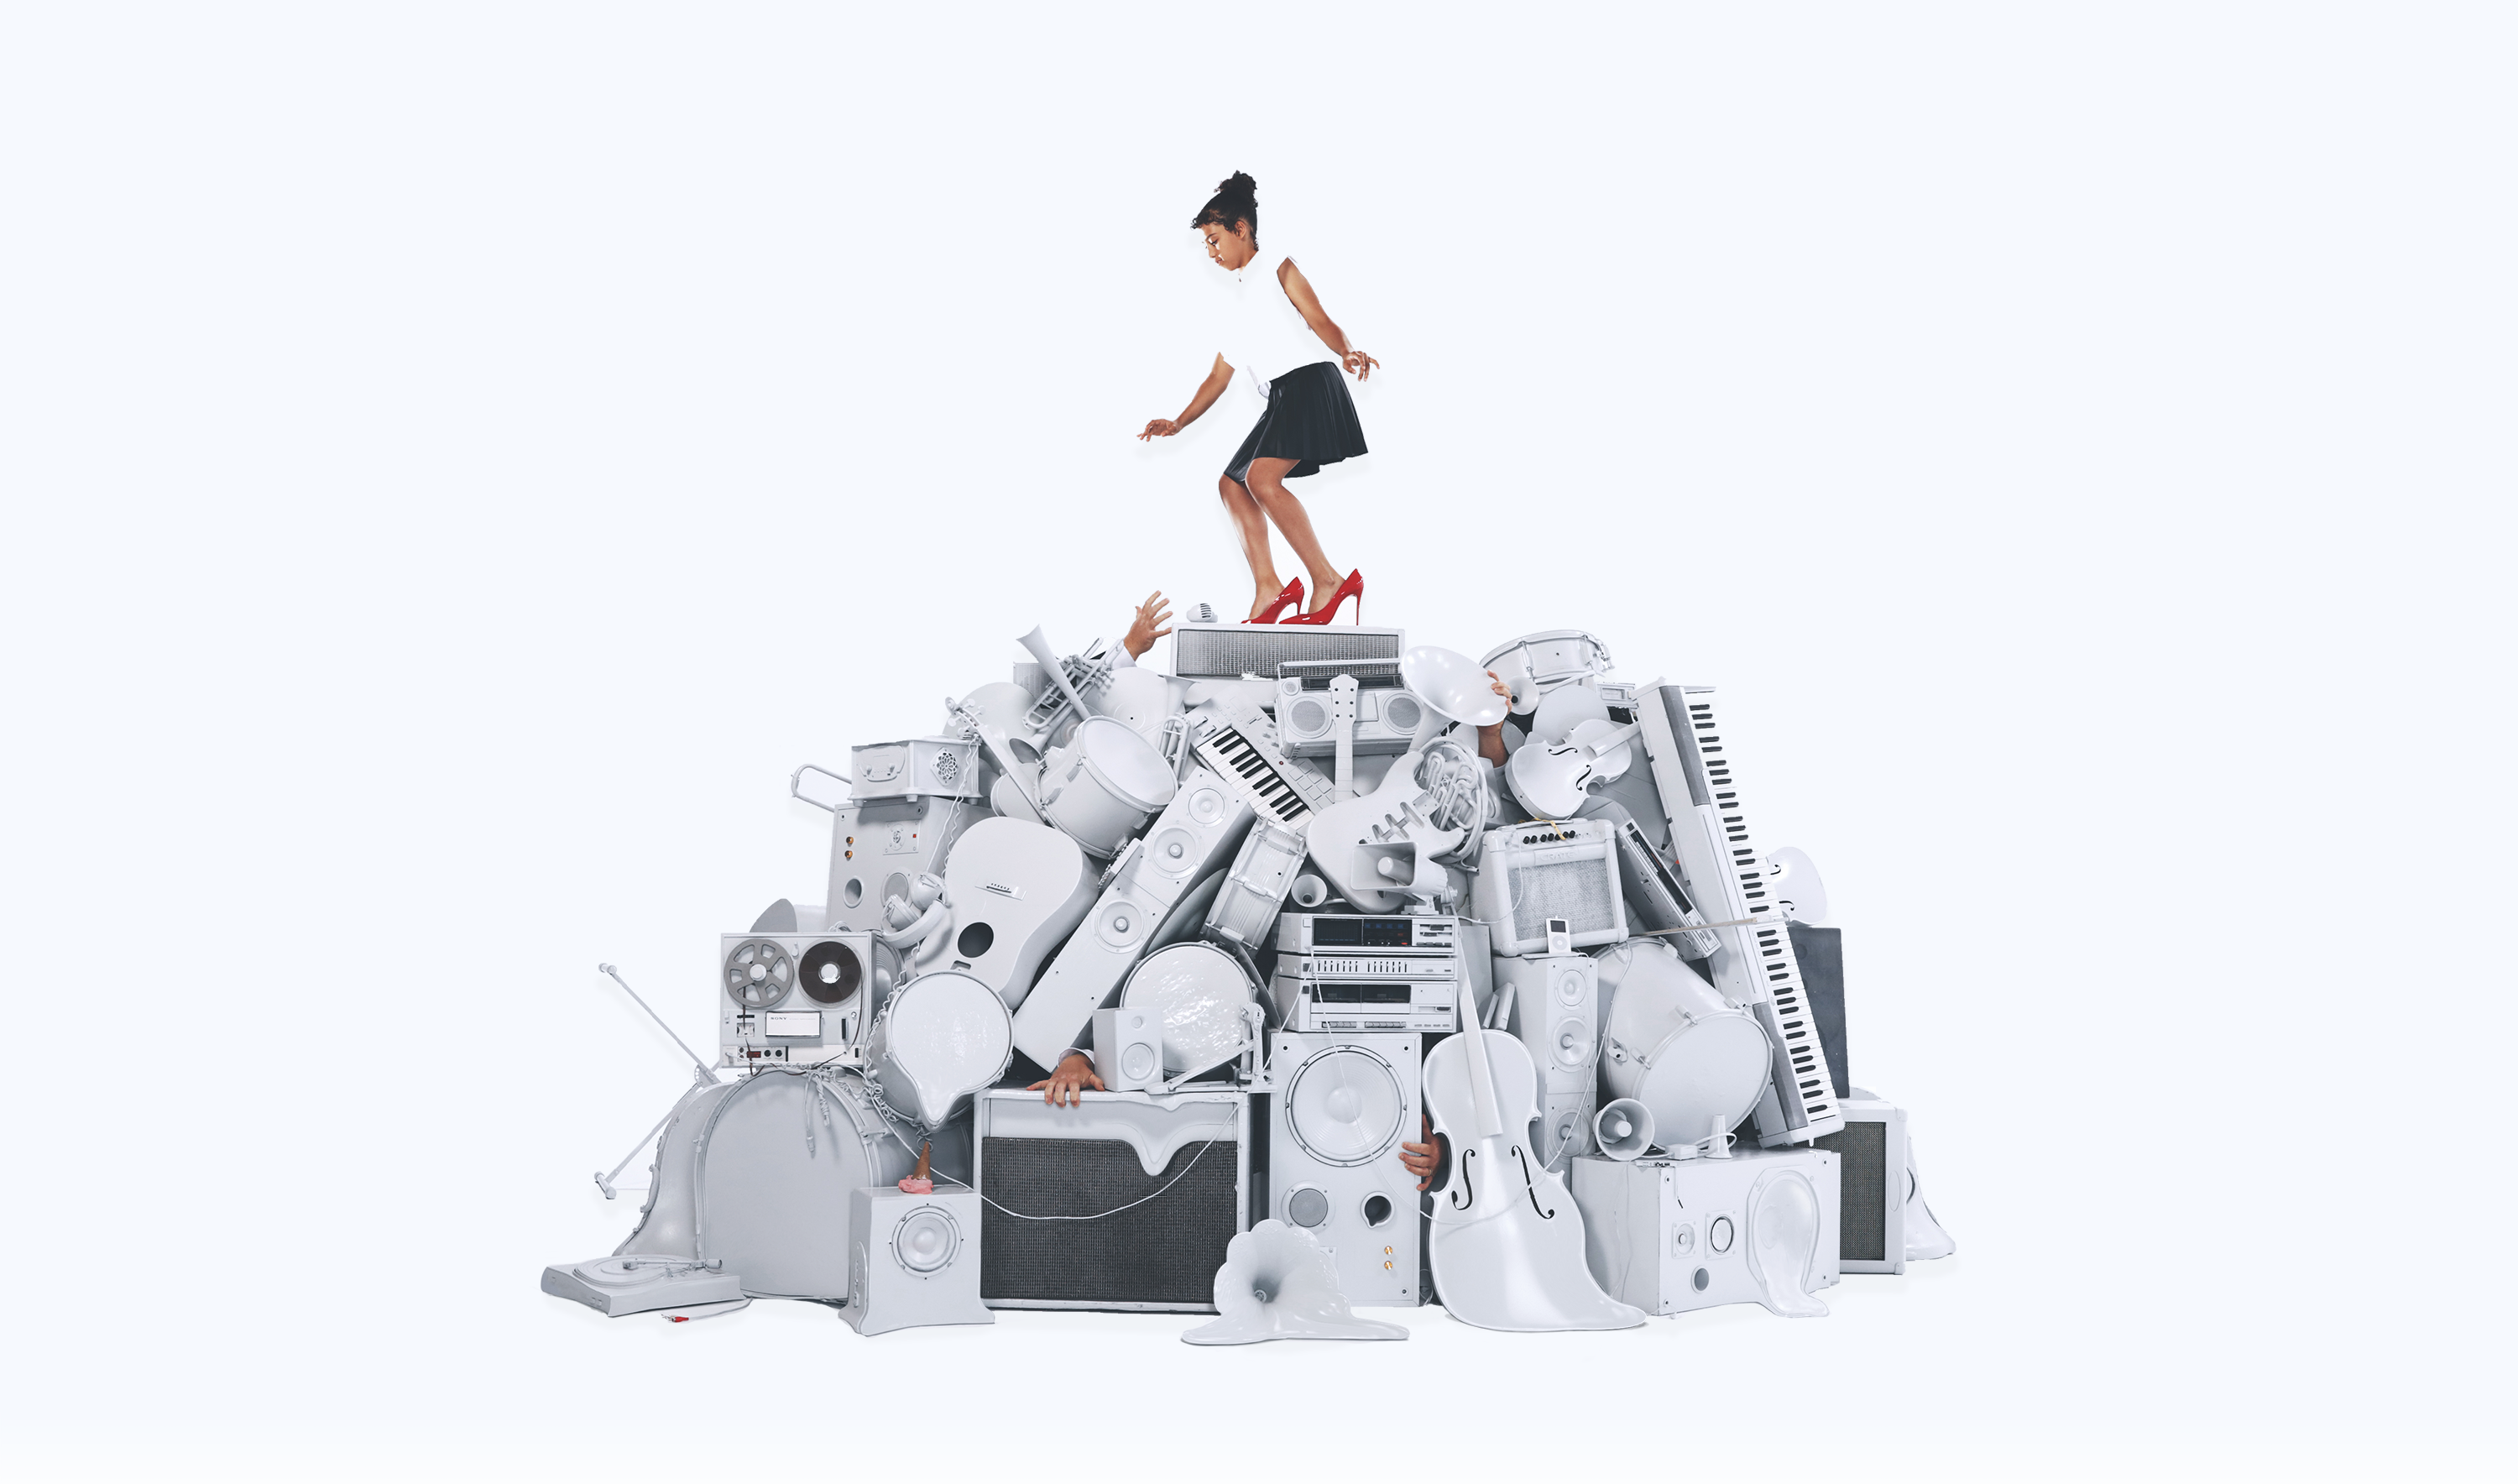 Small girl on pile of white instruments